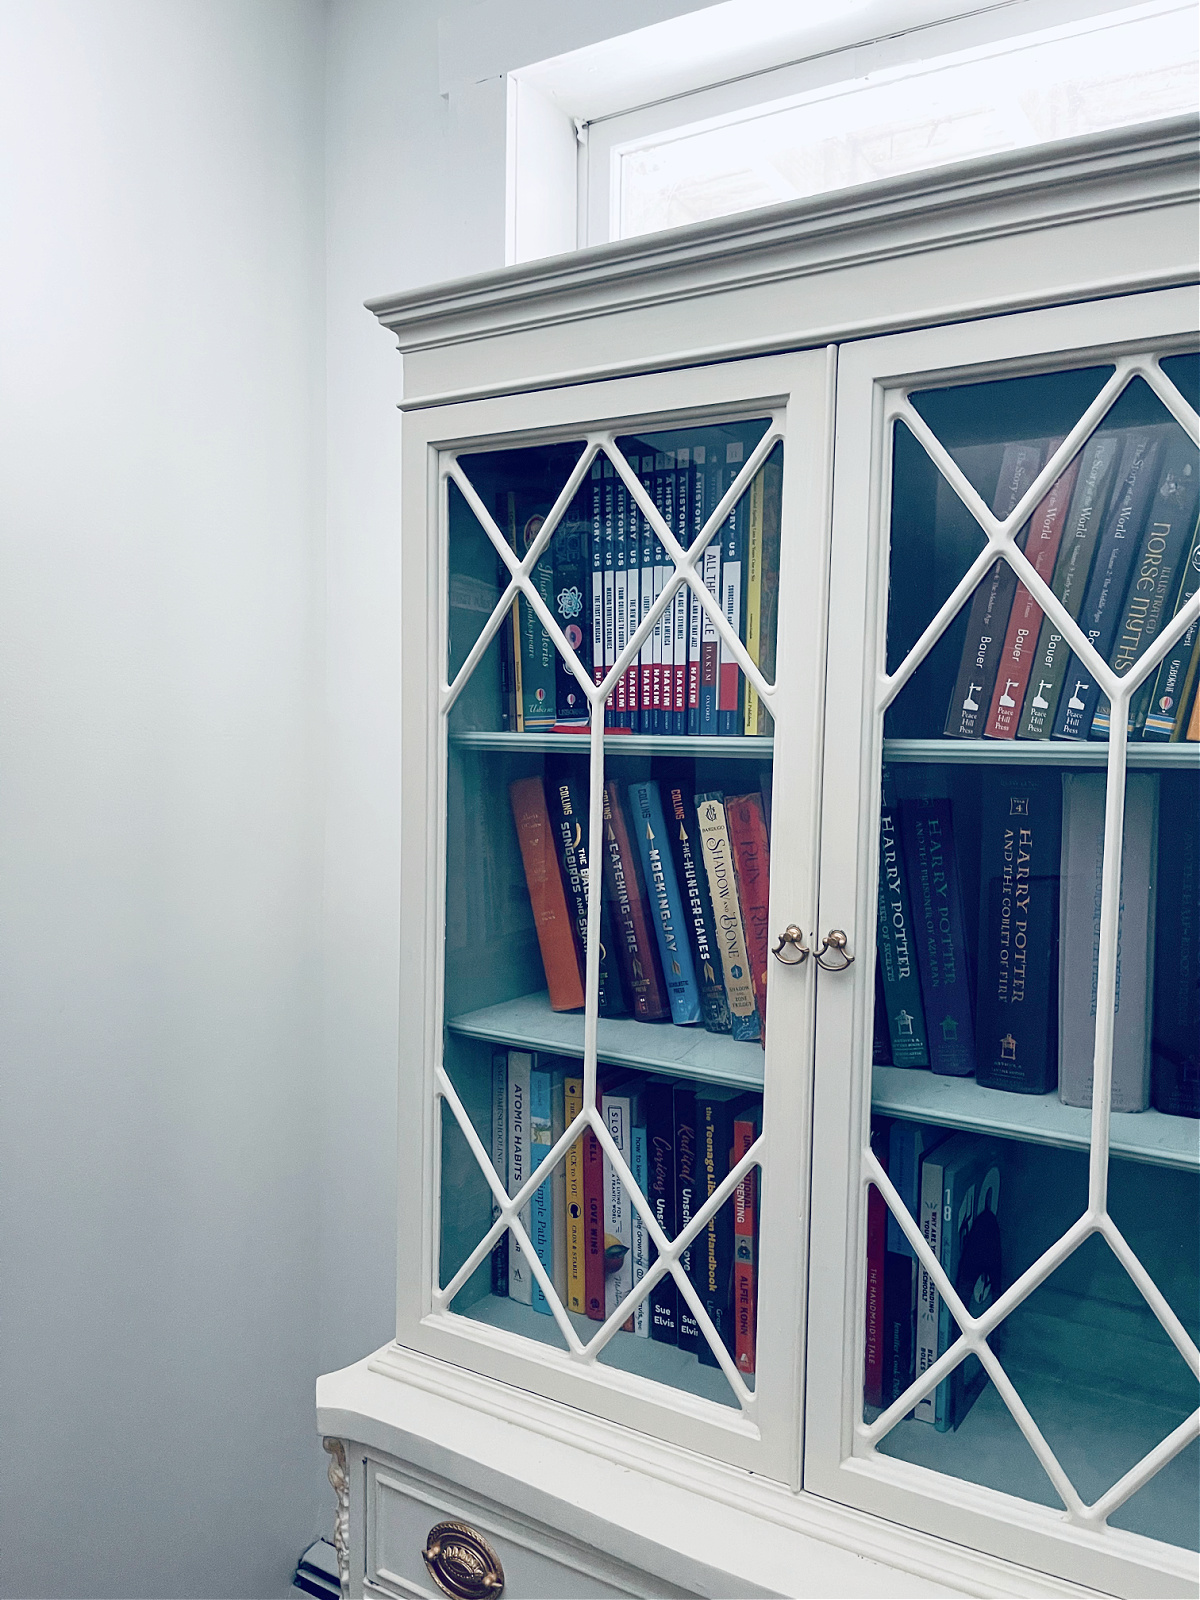 bookshelf with glass doors and light blue painted shelves.